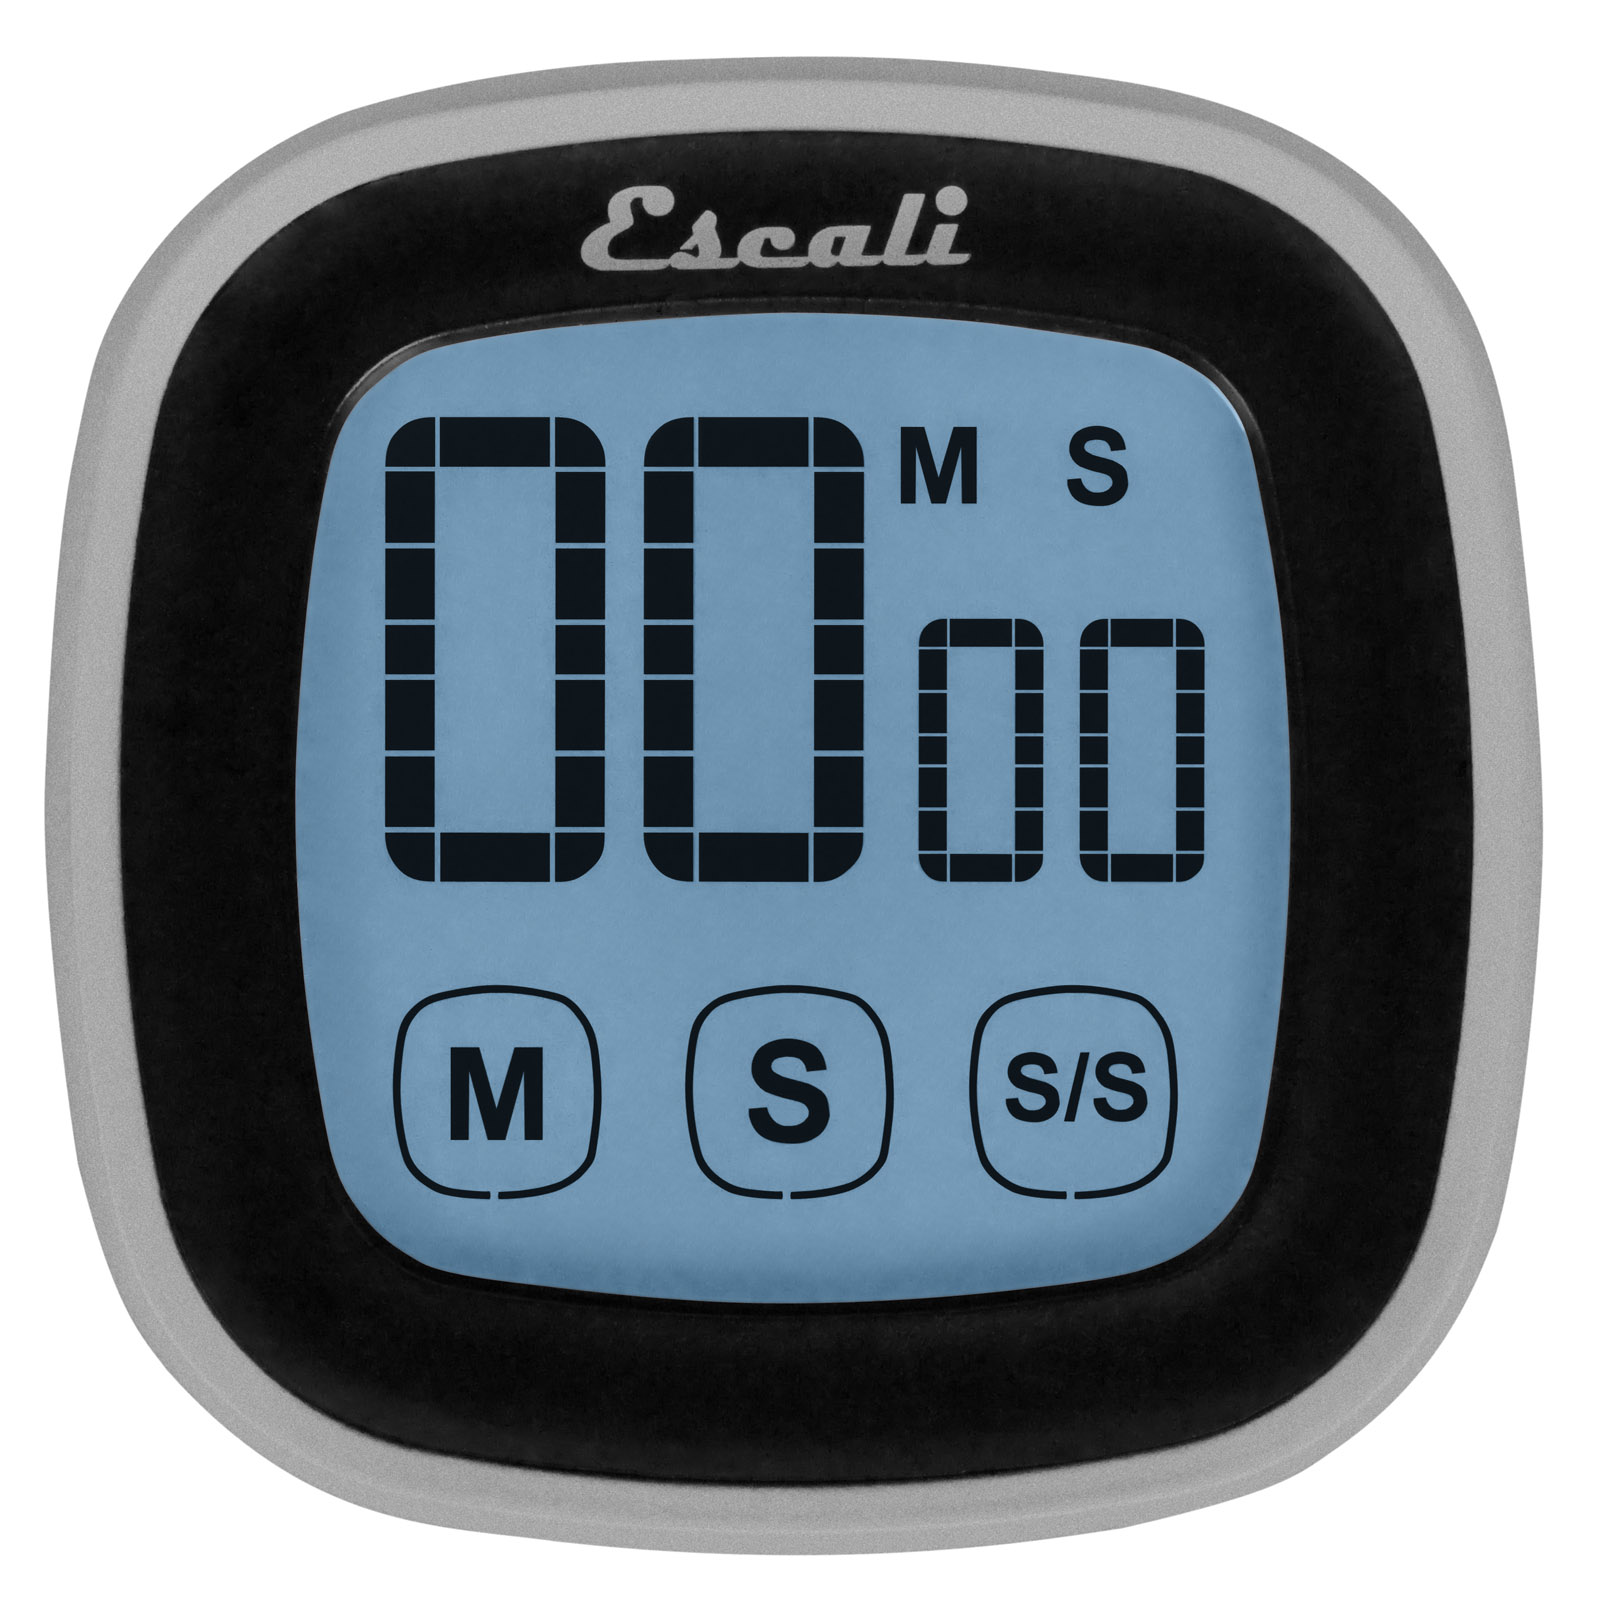 100 MINUTE TOUCH SCREEN DIGITAL TIMER